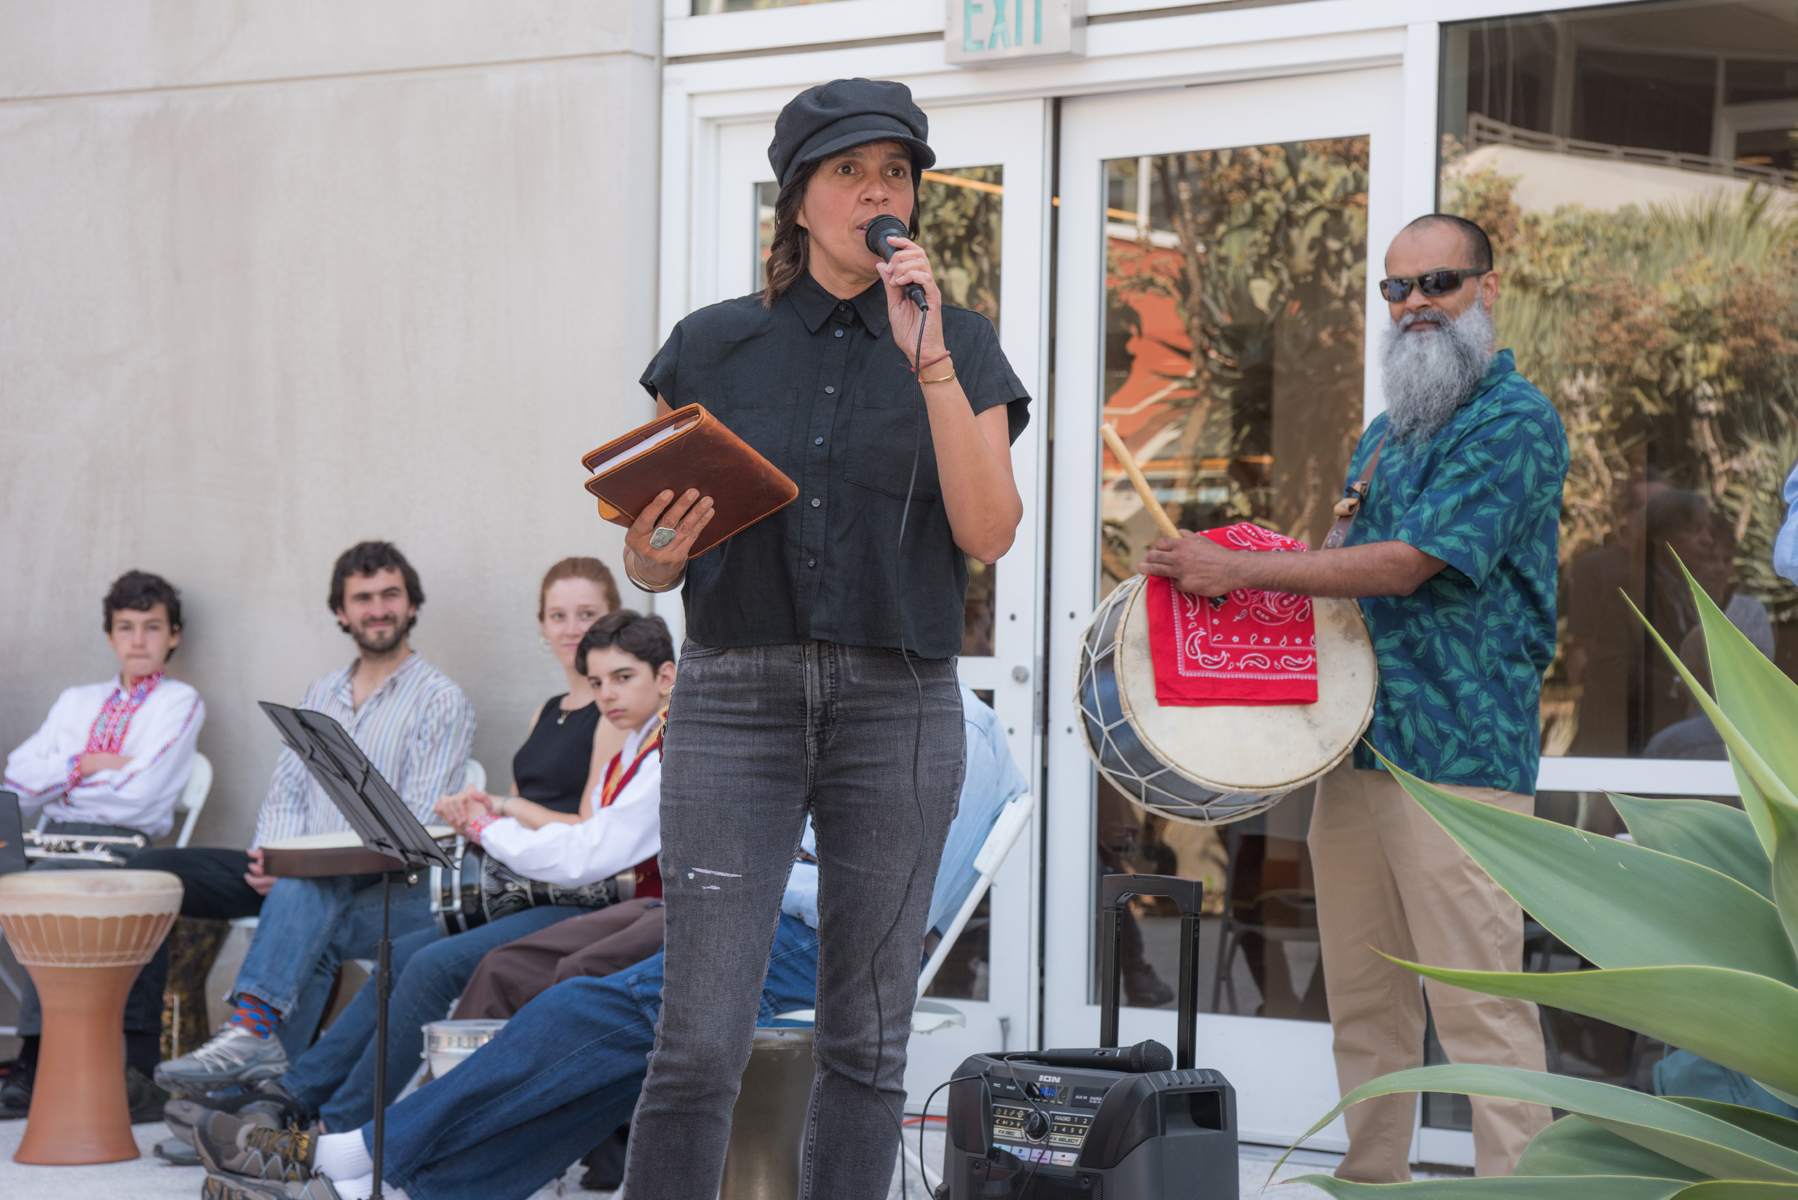 Pico poet spreads the word about new city position